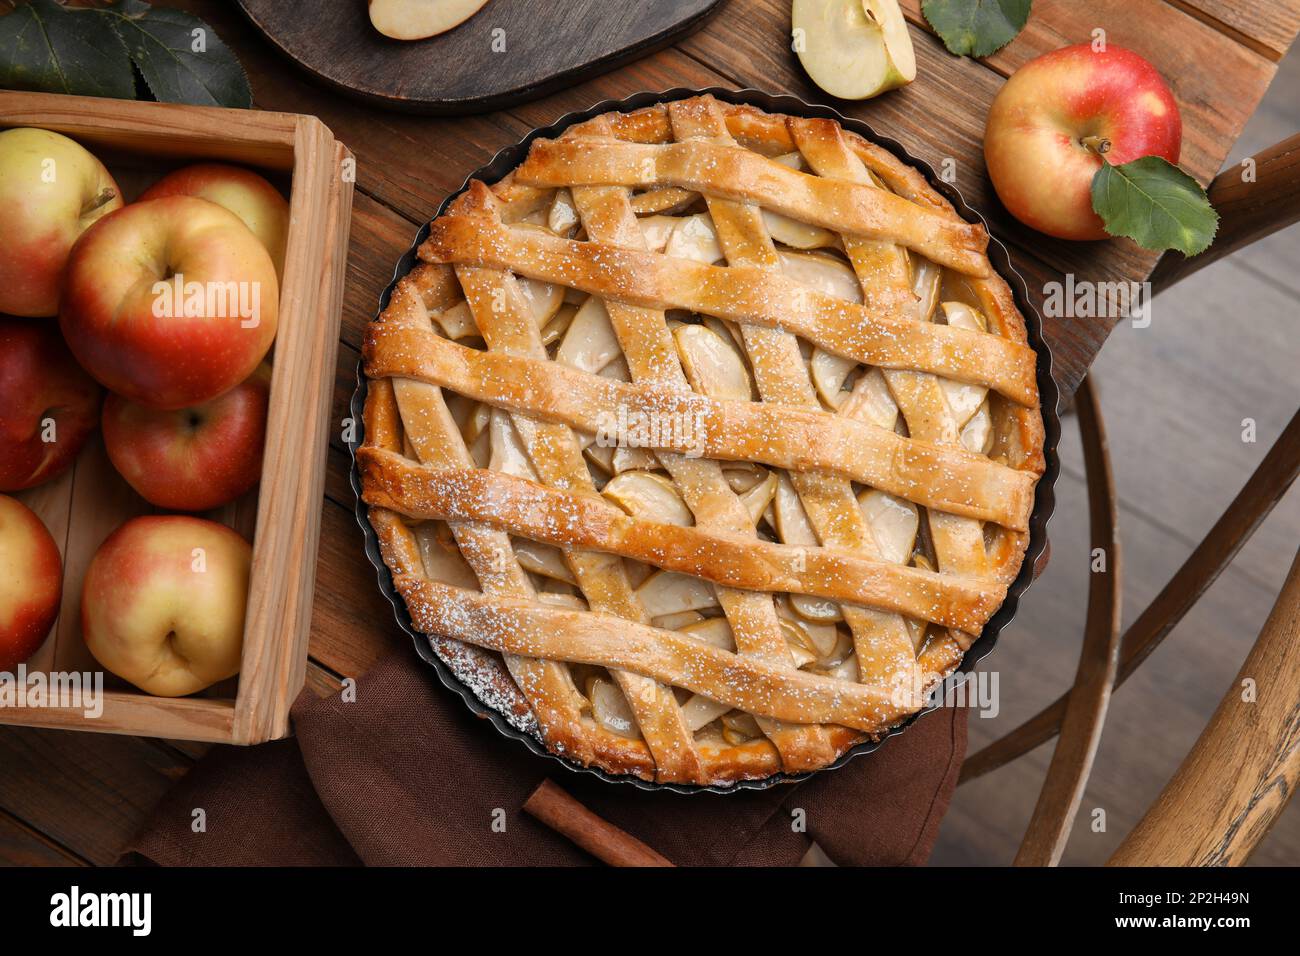 Delicious traditional apple pie on wooden table, flat lay Stock Photo